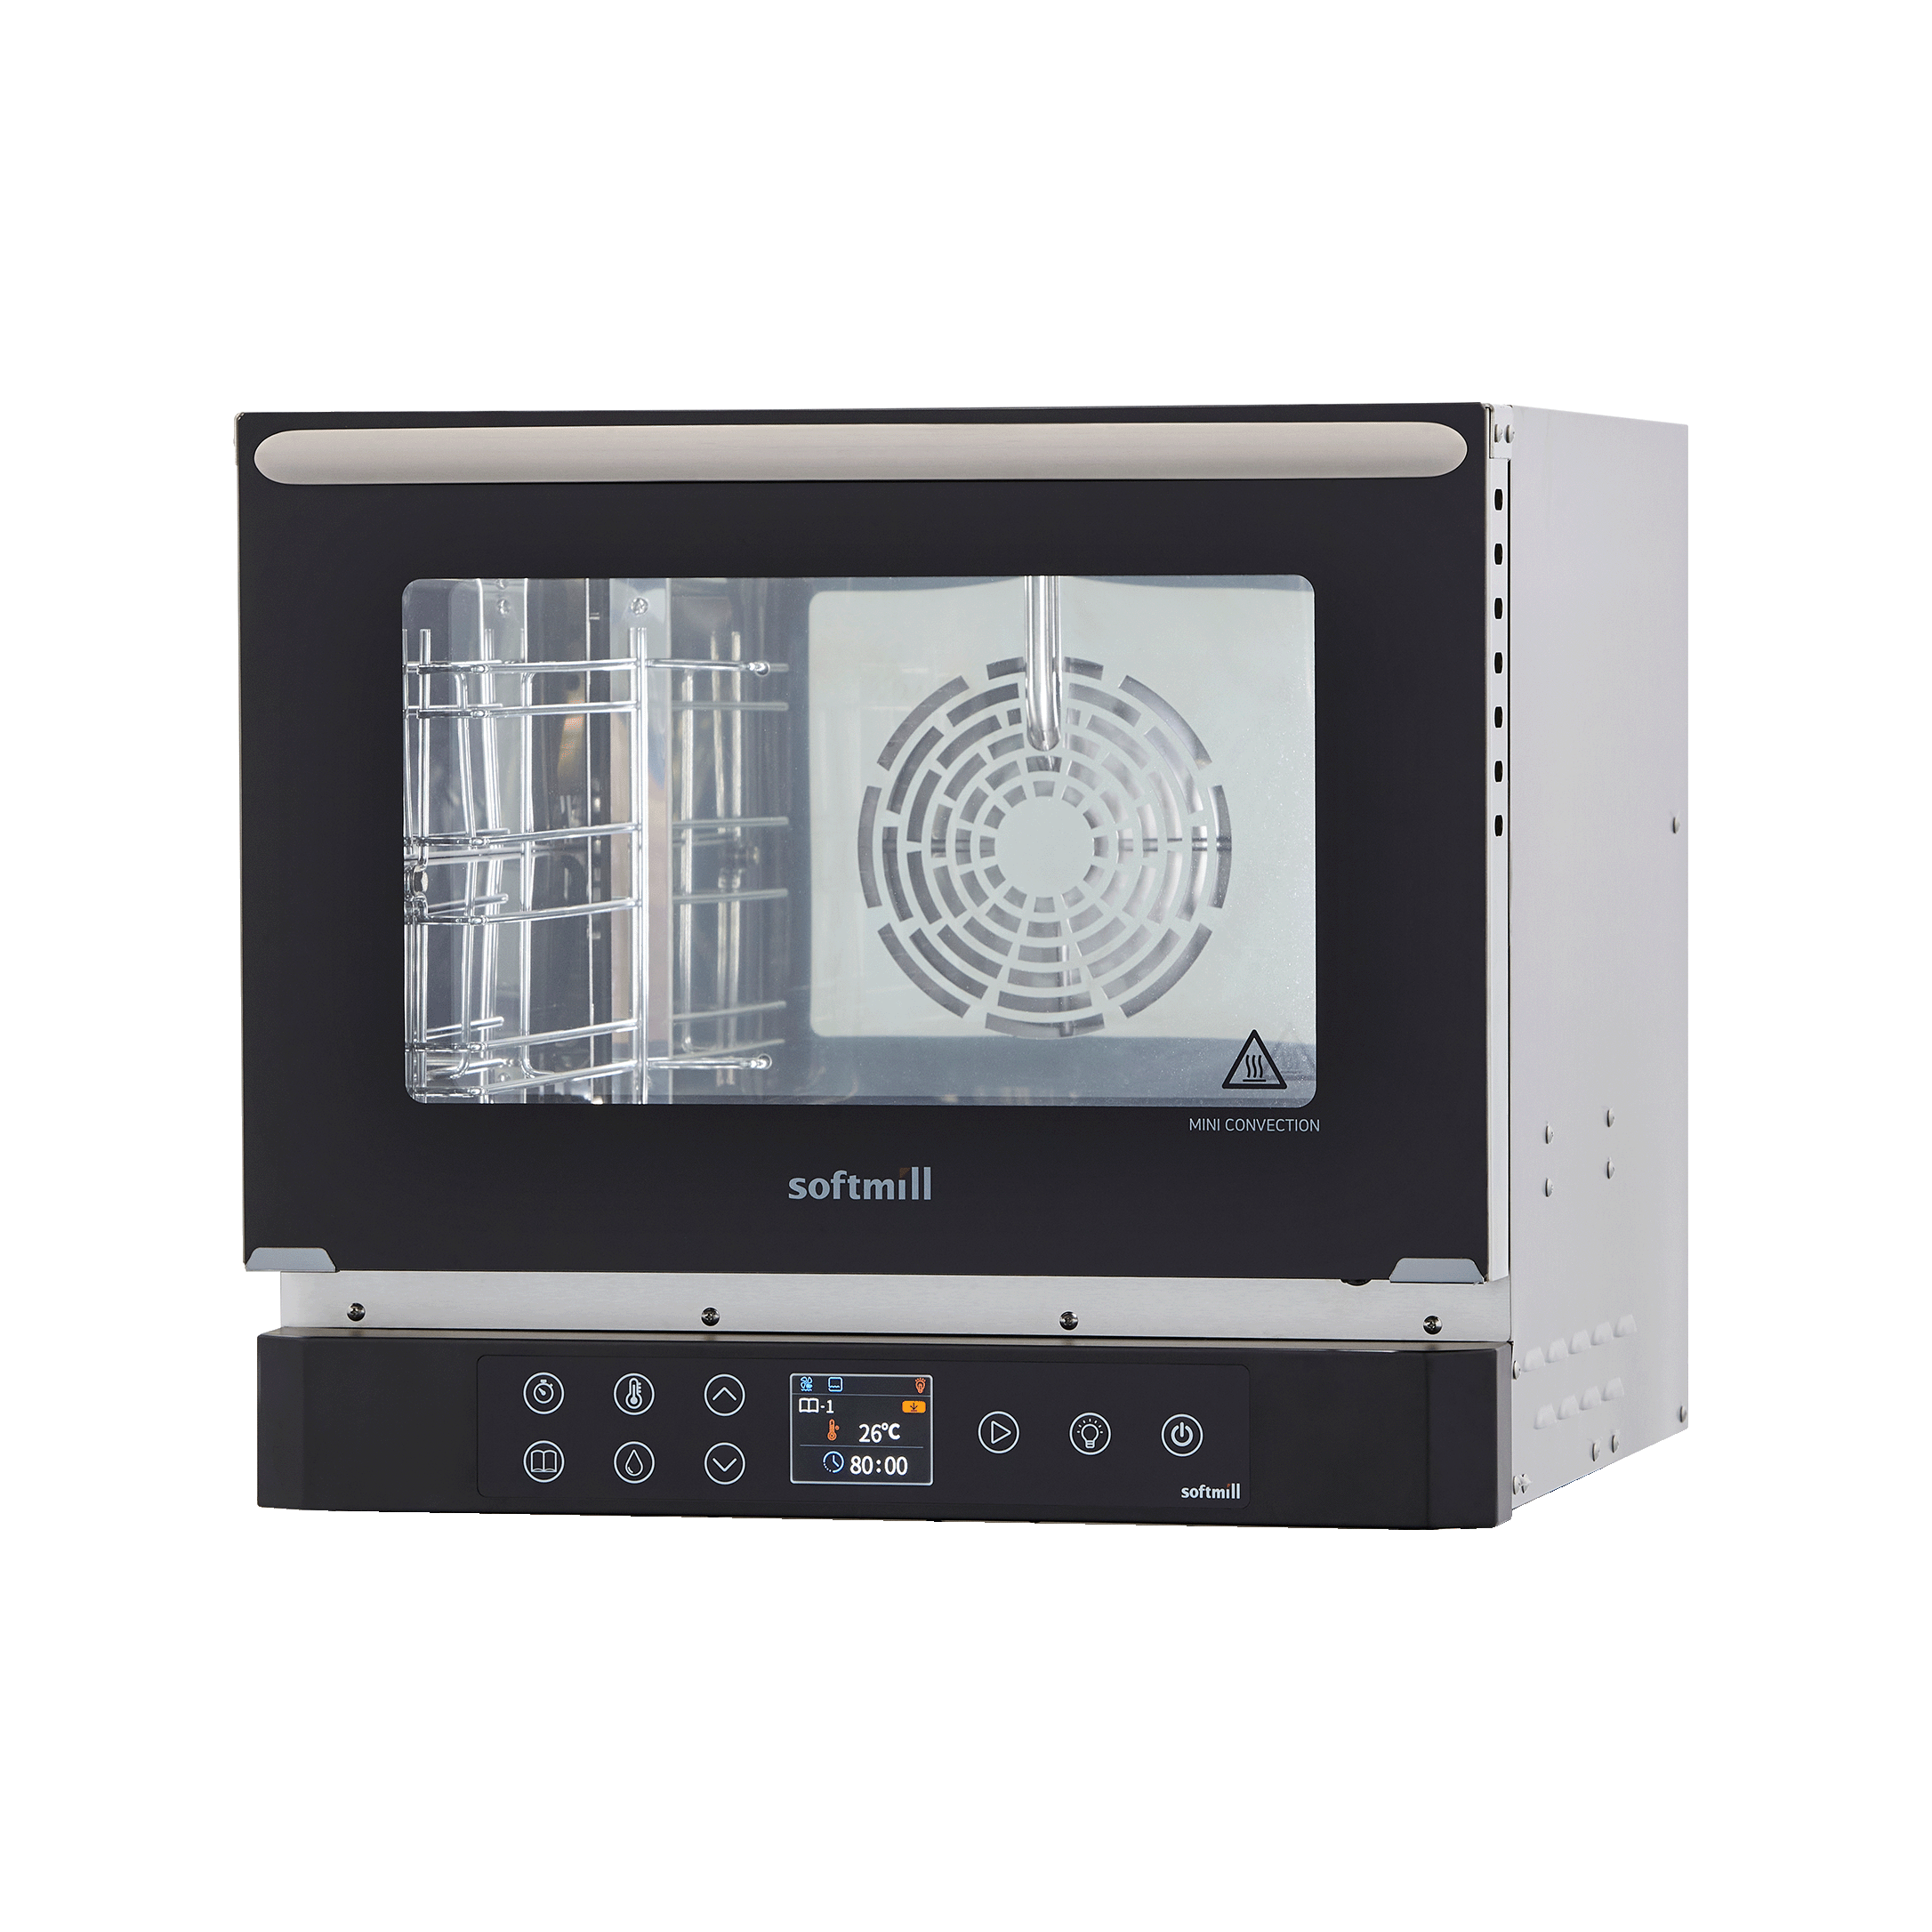 Mini Convection Oven(3 Tray/4 Tray) detail page link